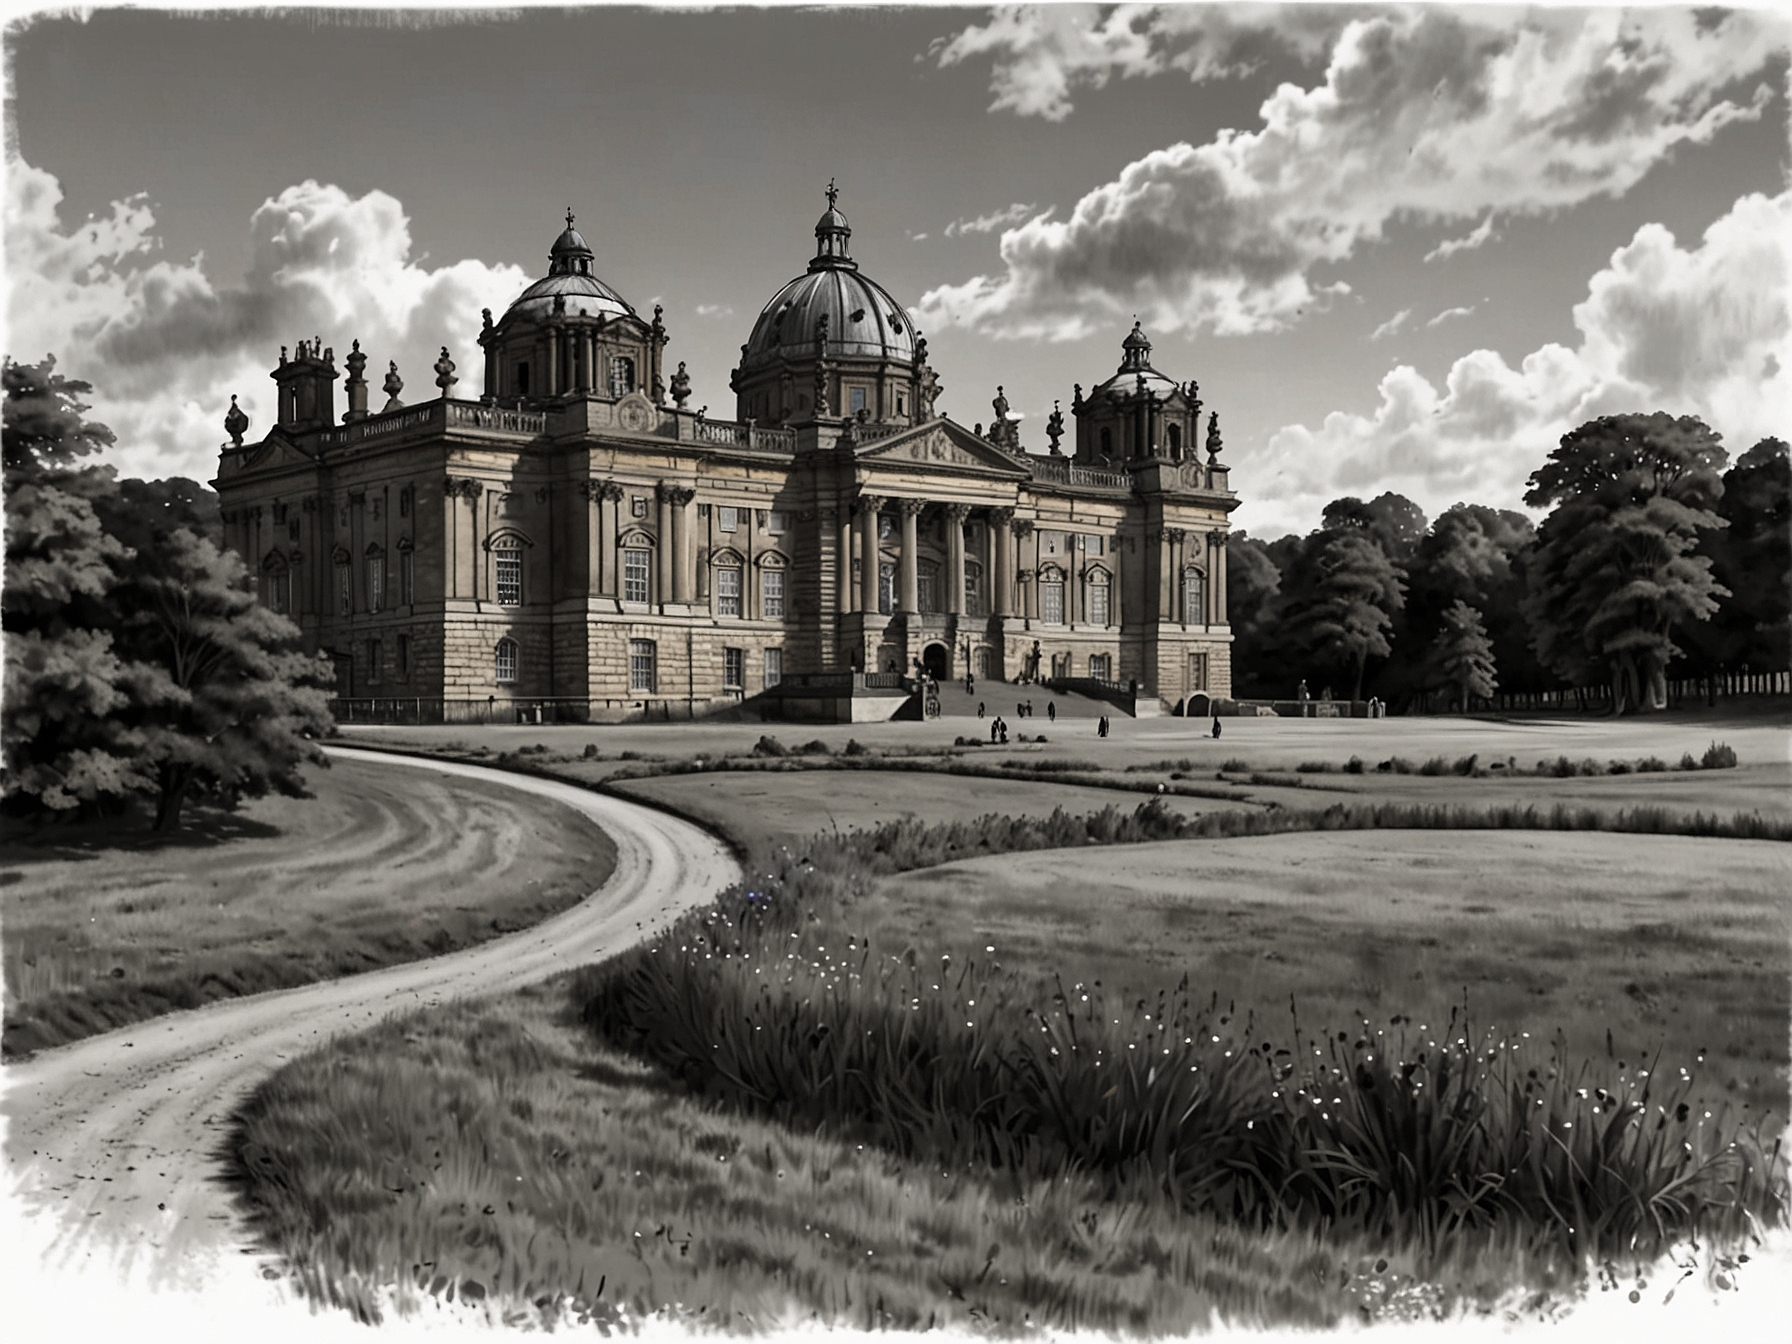 A scenic view of Castle Howard, representing Simon Howard's legacy and the historical significance that he and Rebecca passionately preserved during their union.